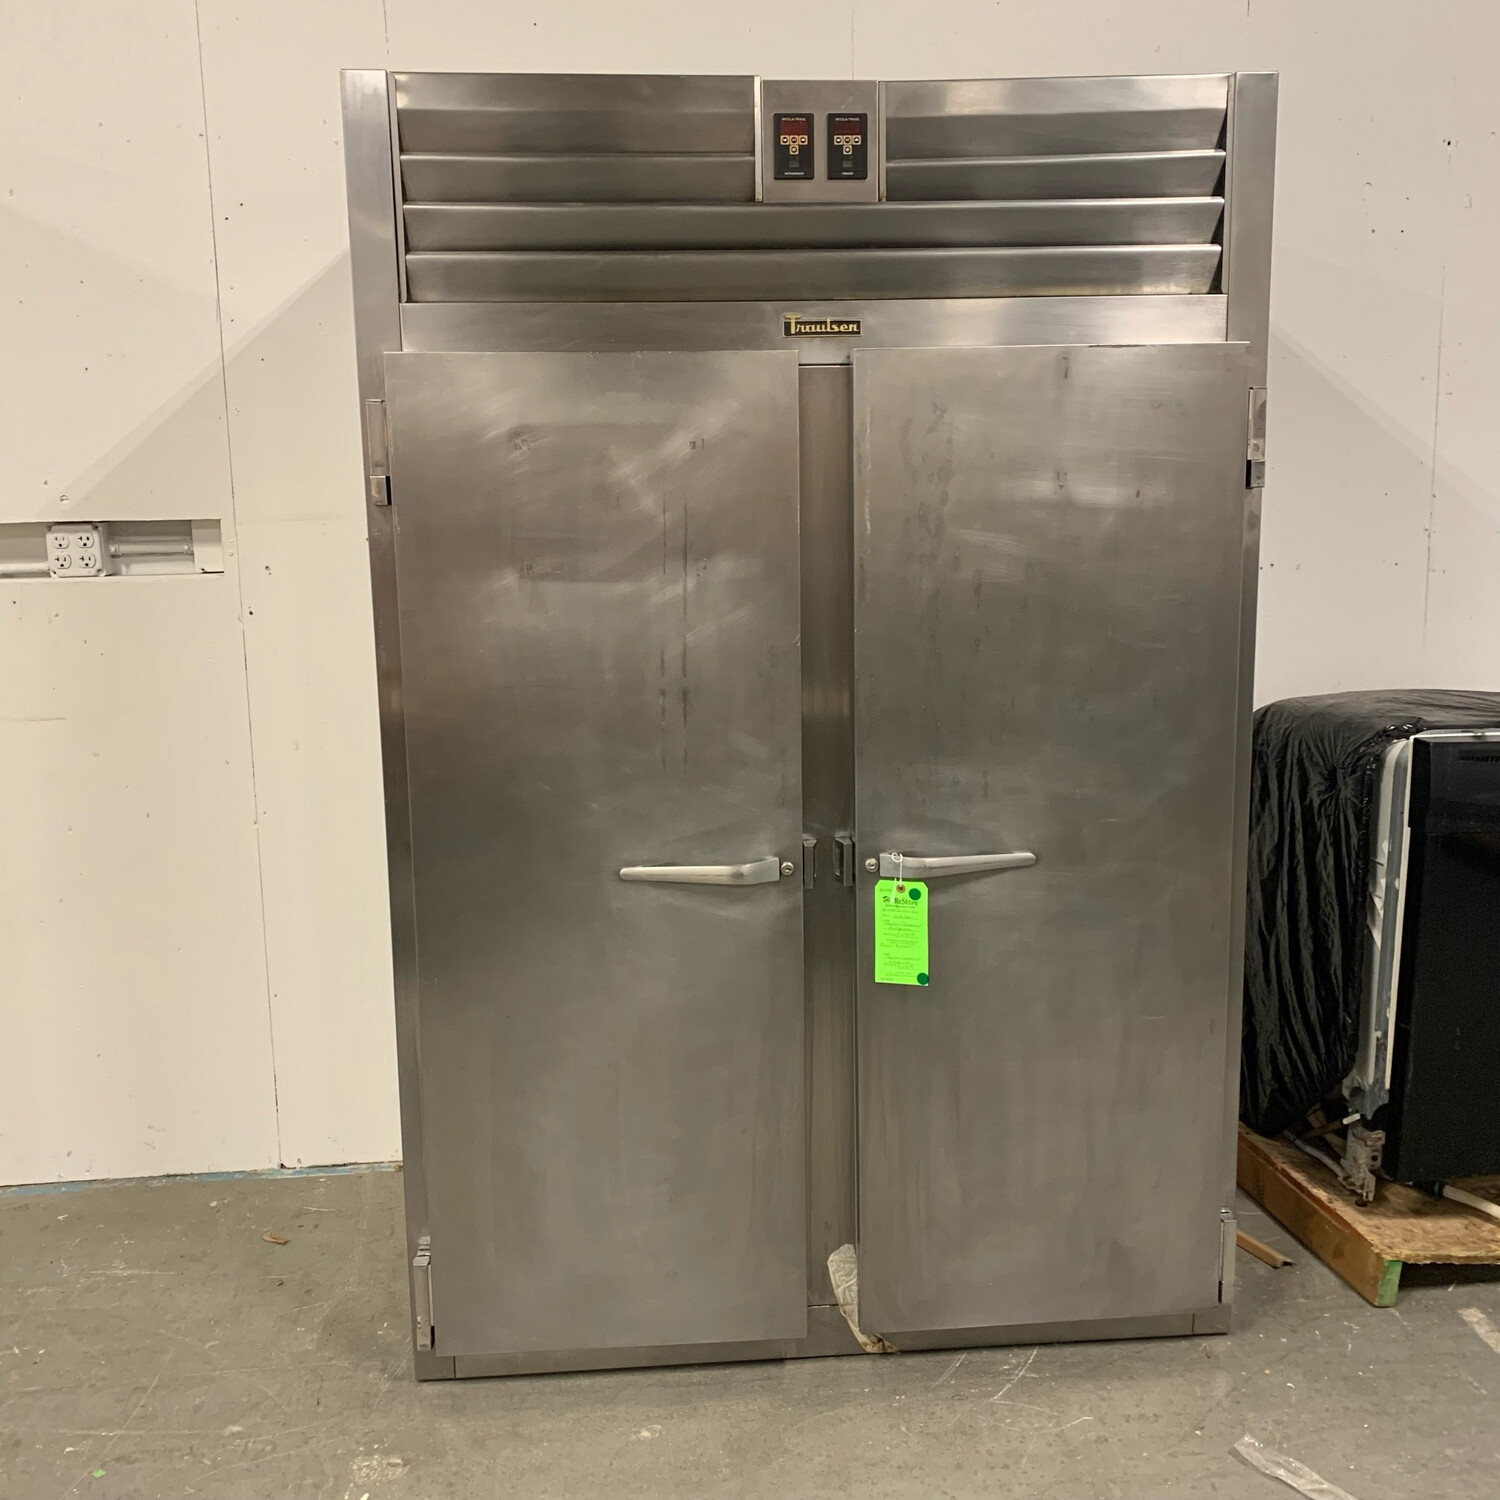 Trauslen Commercial Refrigerator